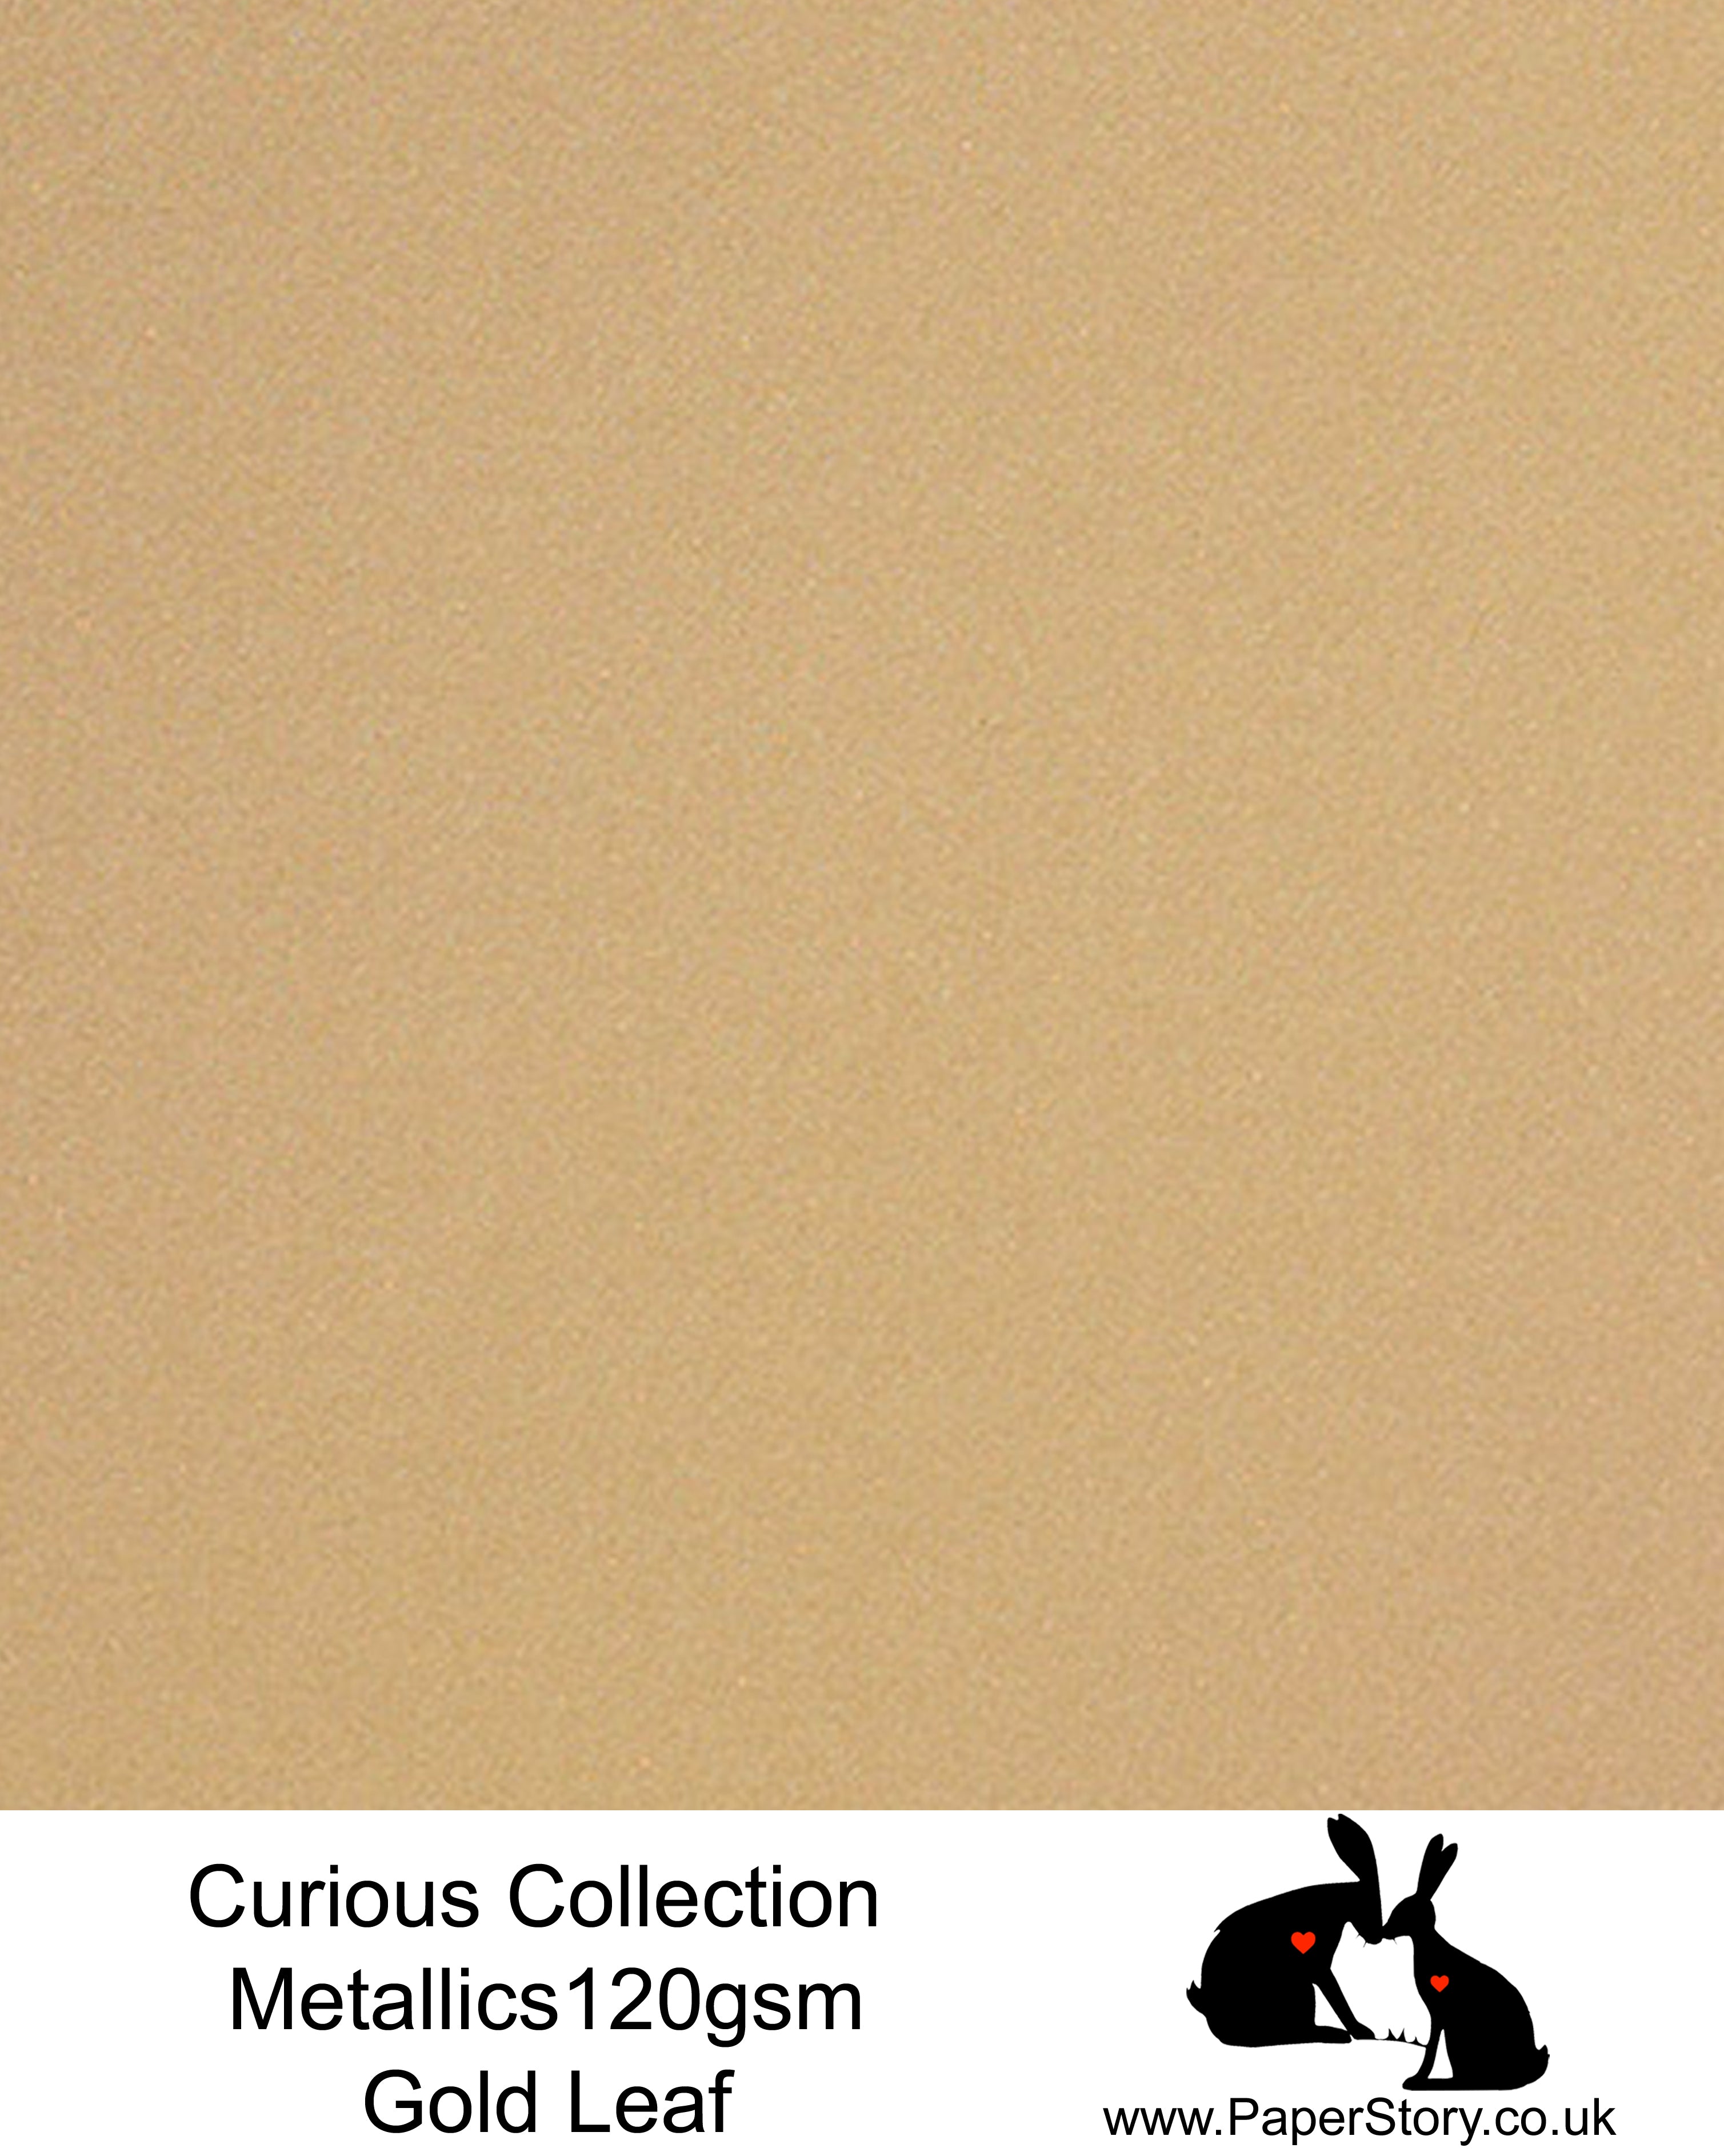 Curious Collection Curious Metallics Gold Leaf, soft warm gold. This unique metallic paper is unlike any other metallic shimmer surface, the natural underlying wove surface of Curious Metallics enhances the stunning metallic shimmer, whilst making it easier to print on with an inkjet printer